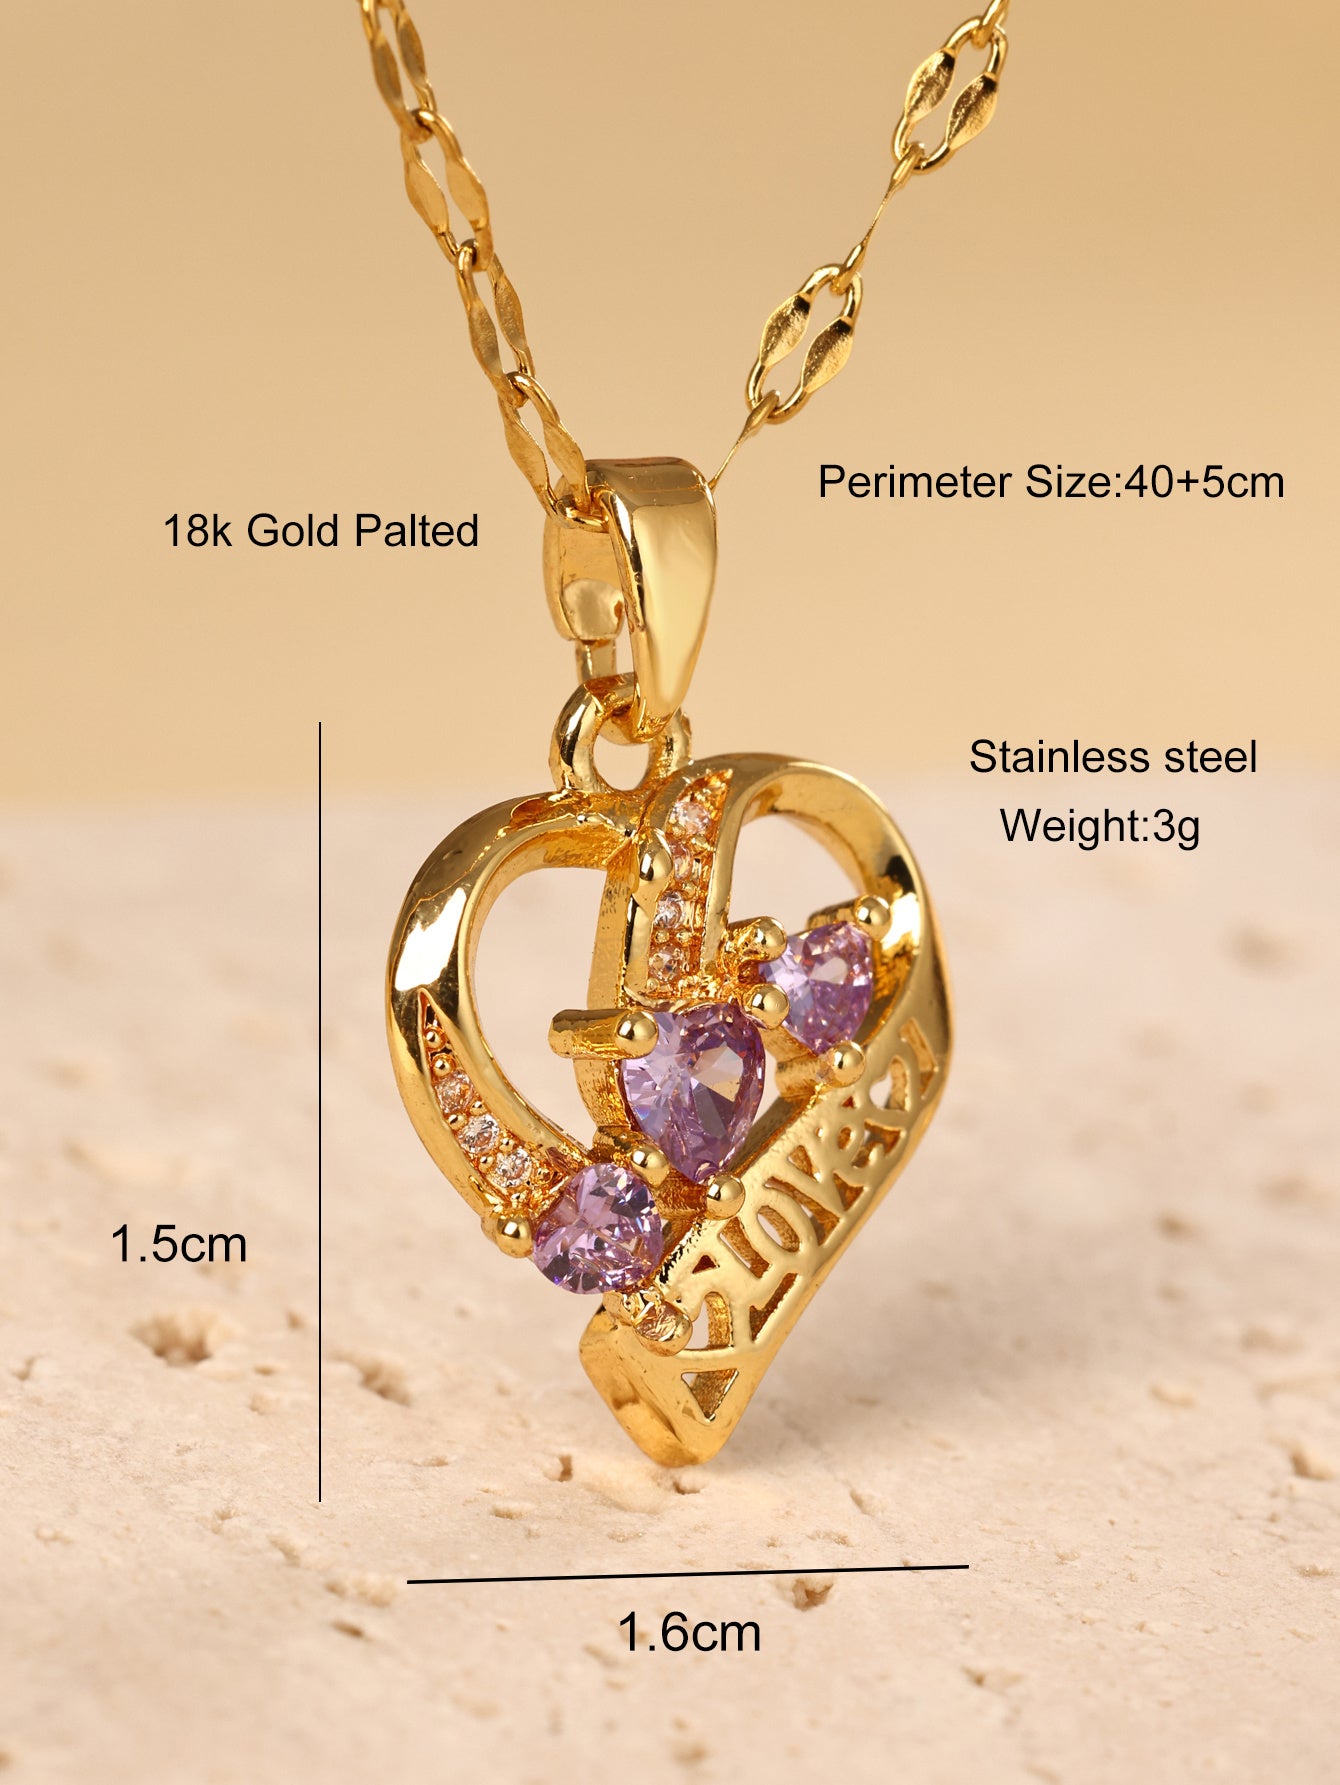 Korean Love Necklace For Women, Light Luxury, Simple And Versatile, Fashionable And Elegant, Zircon LOVE Heart Shaped Pendant Necklace